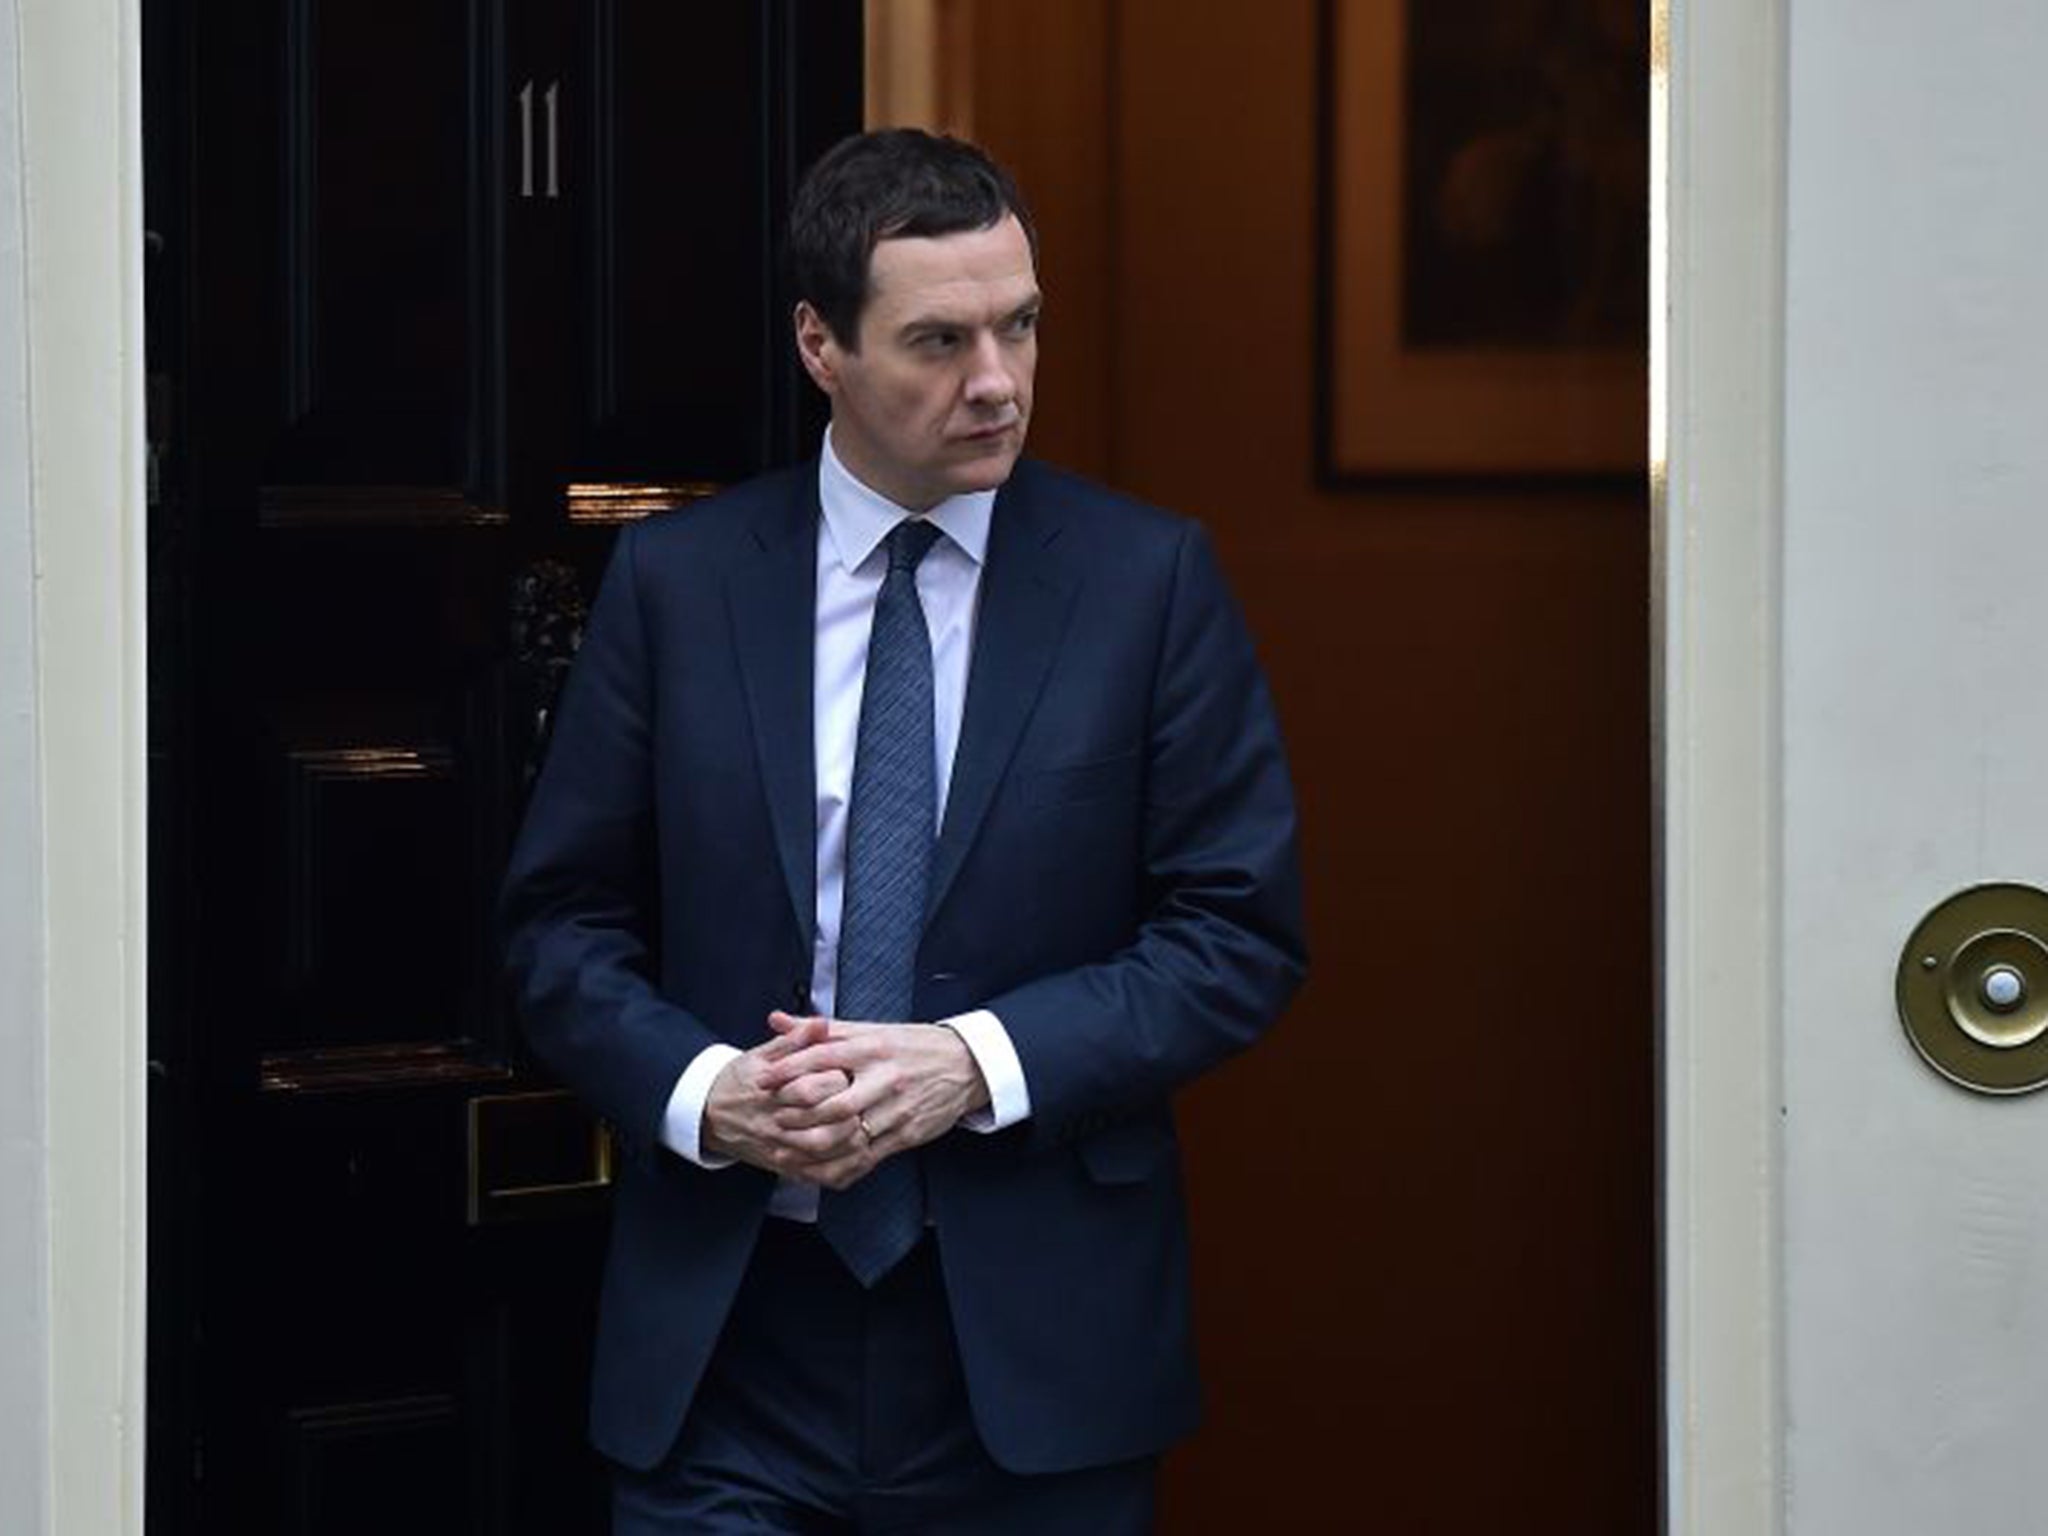 Osborne has indicated that he will propose further spending cuts